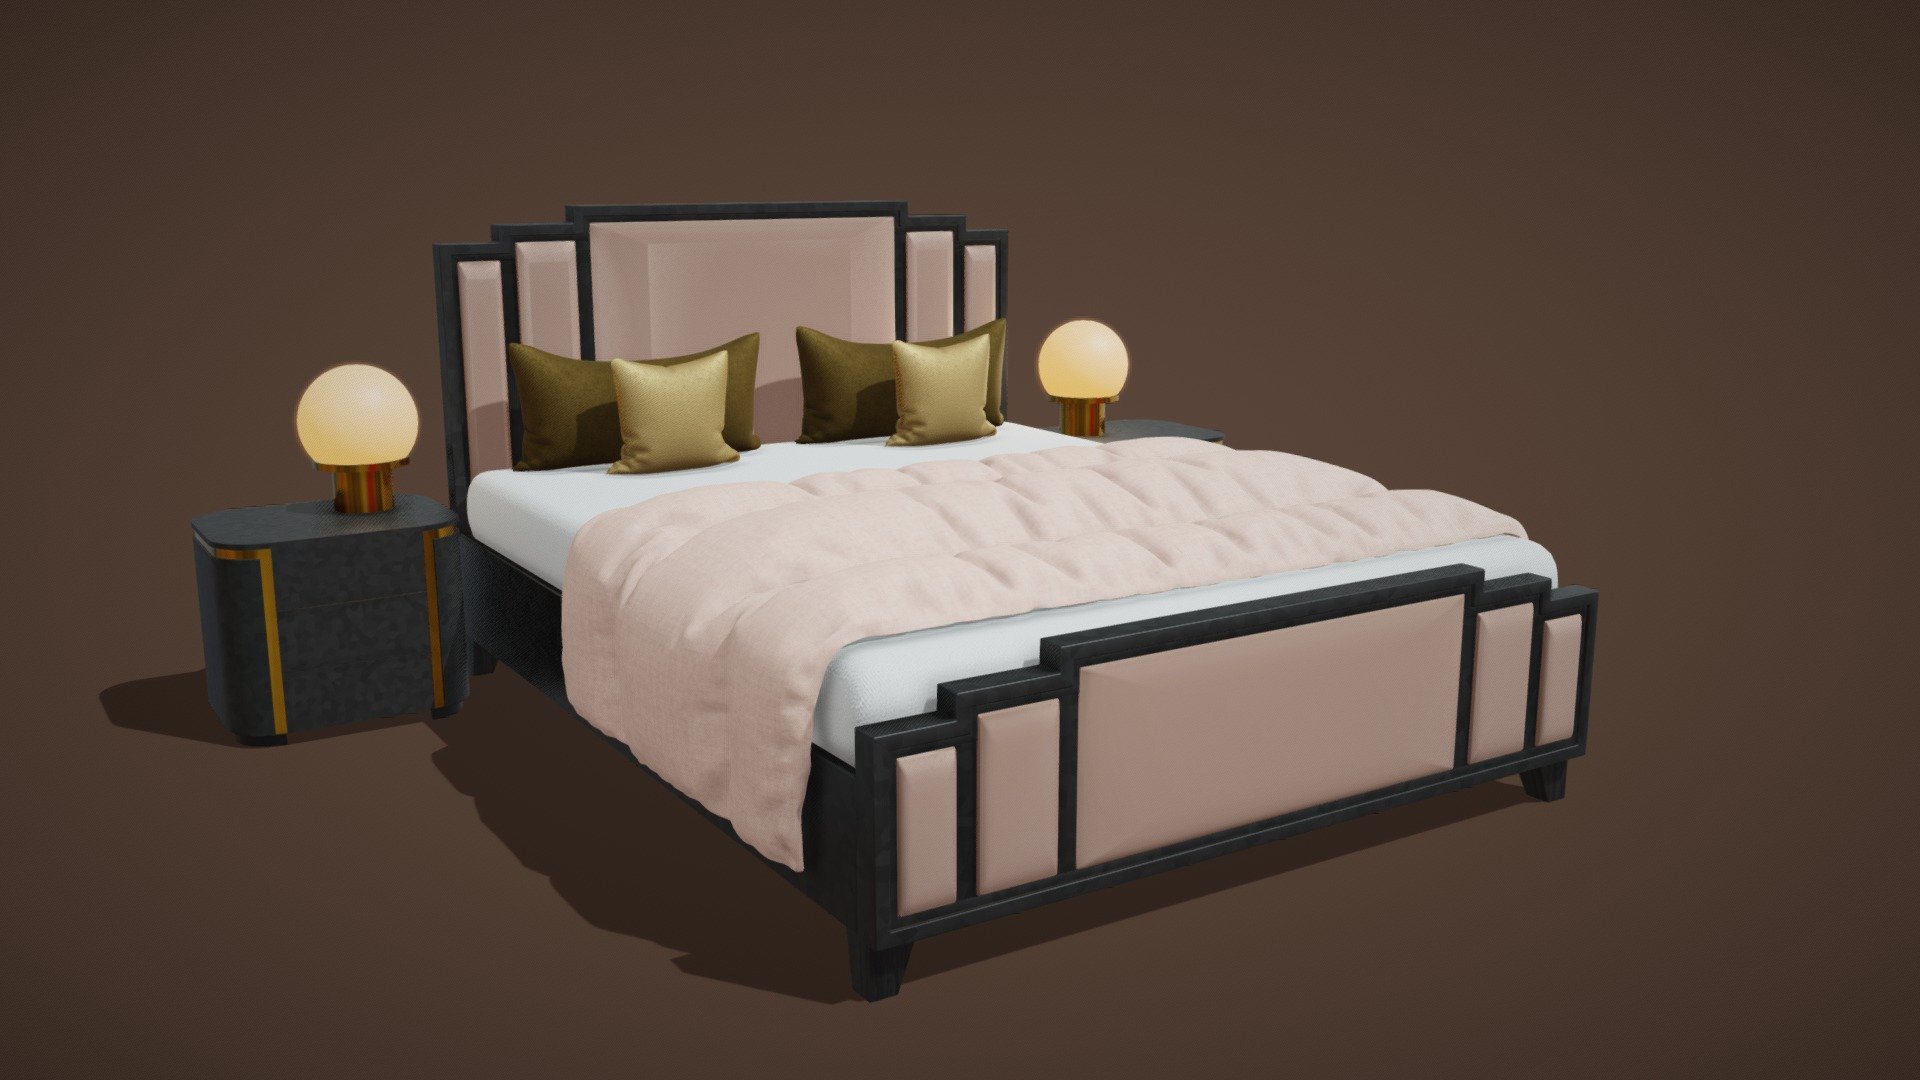 Thats a bed set 02

Model is made for Modern Design Interior 

Great for any interior project or AR Project.
model has 3 material set
4k textures 3d model